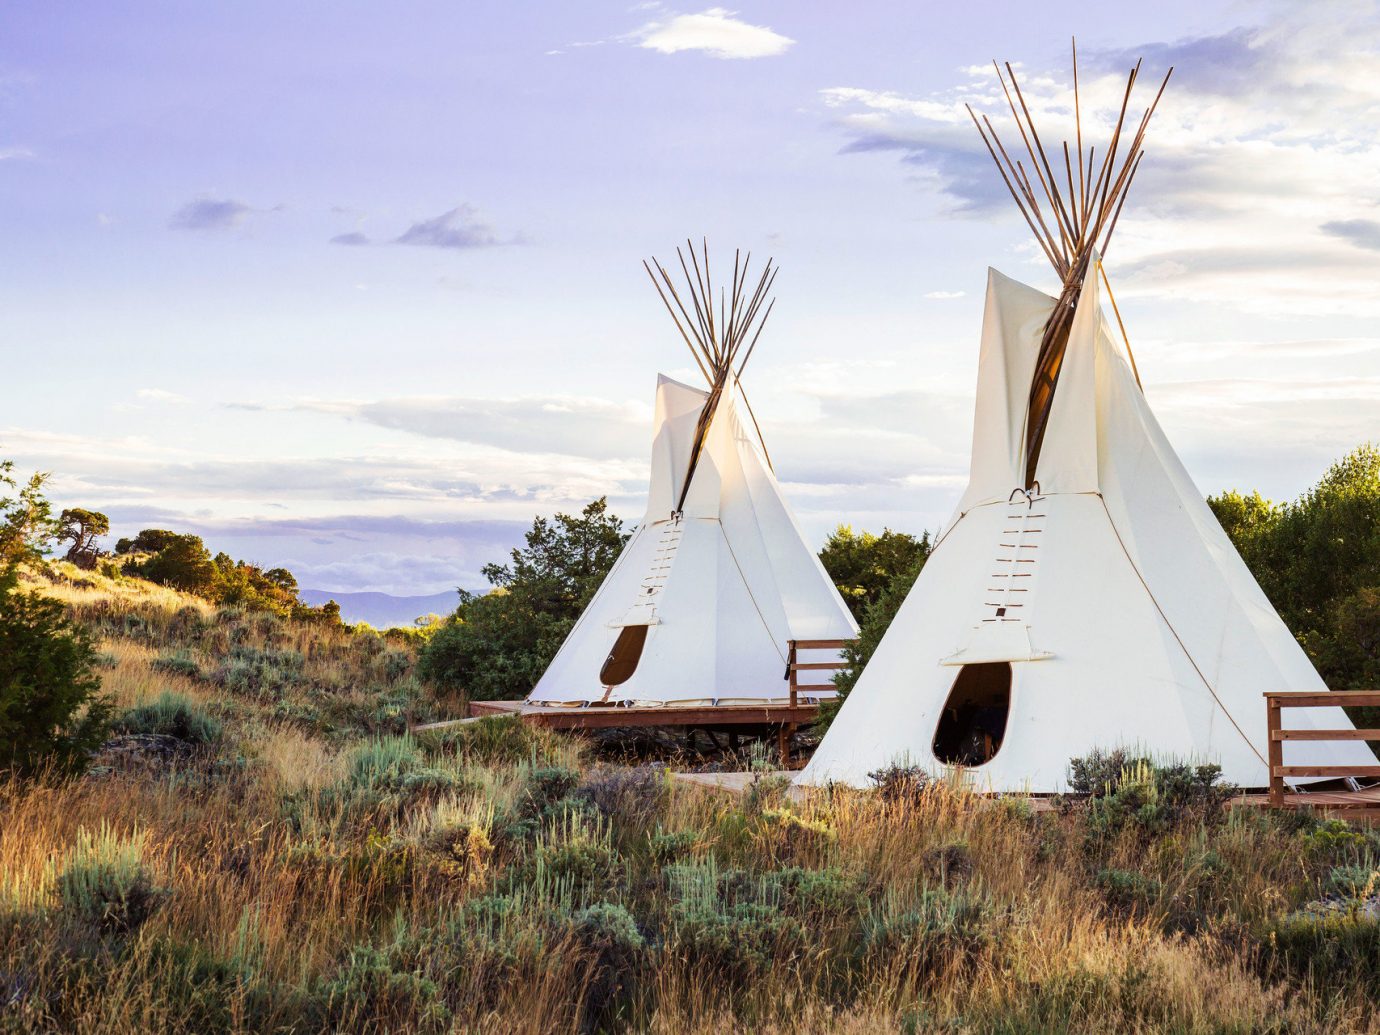 artistic artsy calm Hip isolation Nature Outdoors remote serene teepee trendy Trip Ideas tepee building grass outdoor sky windmill tree field rural area mill wind tower grassy